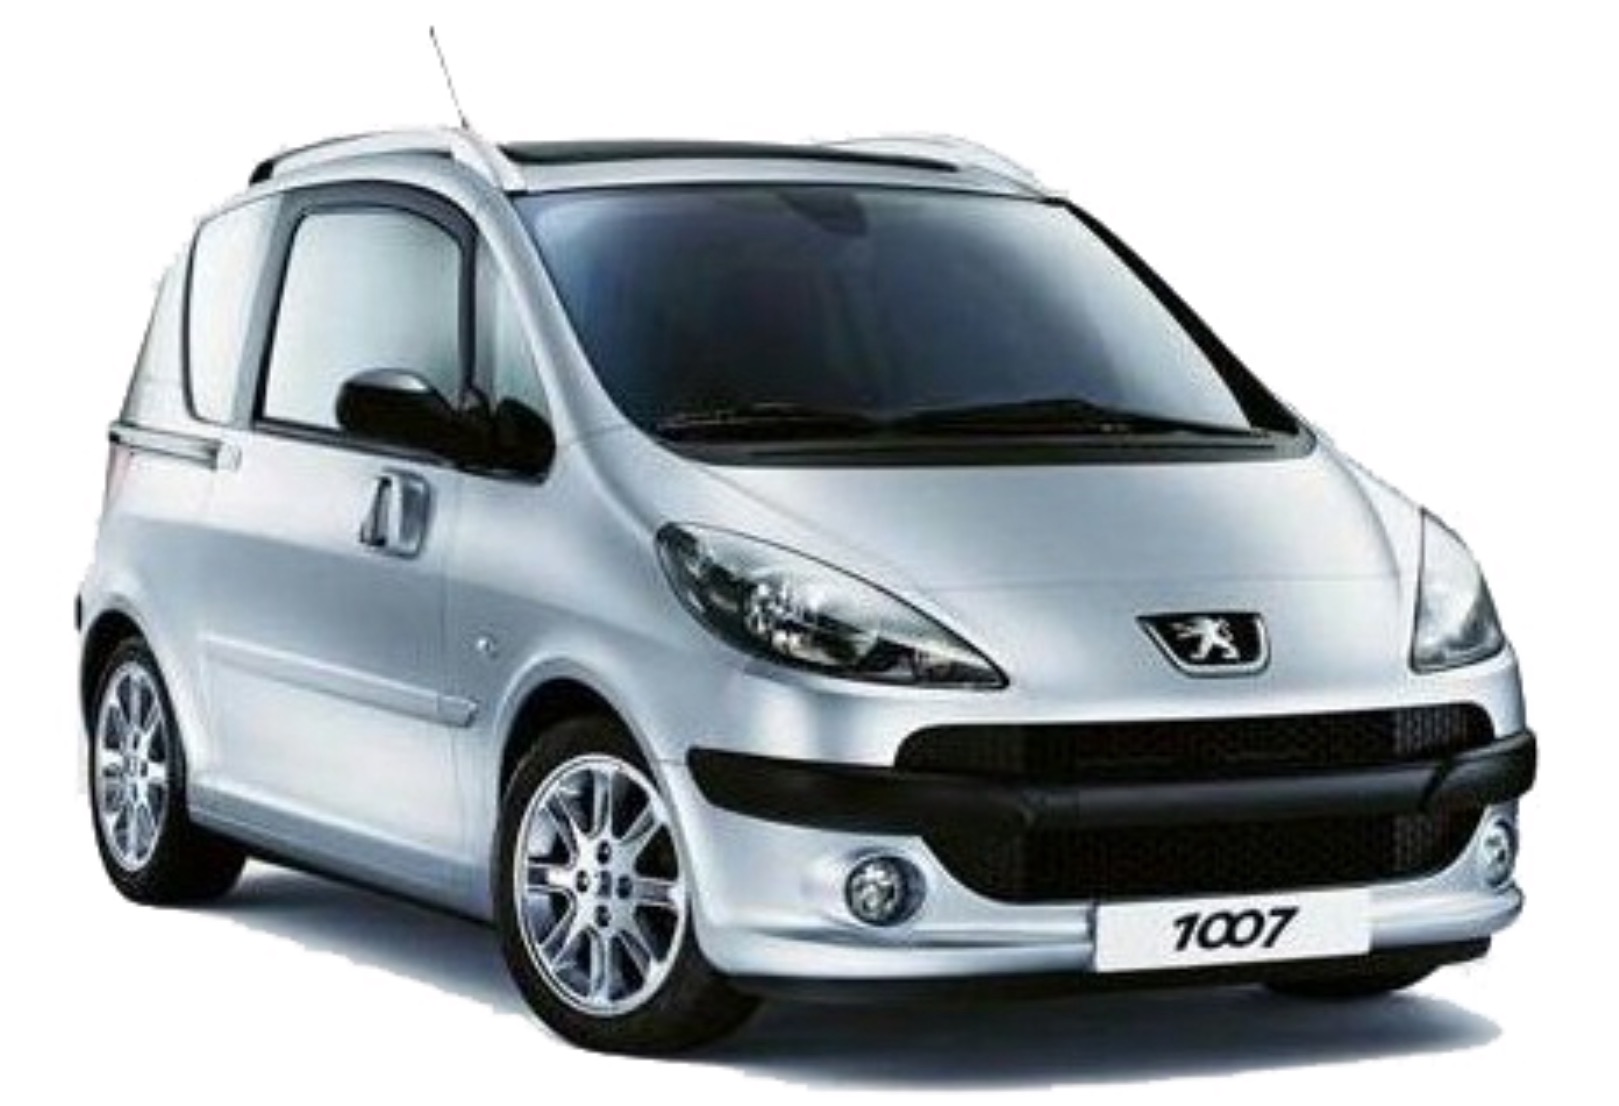 High Quality Tuning Files Peugeot 1007 1.4 HDi 68hp